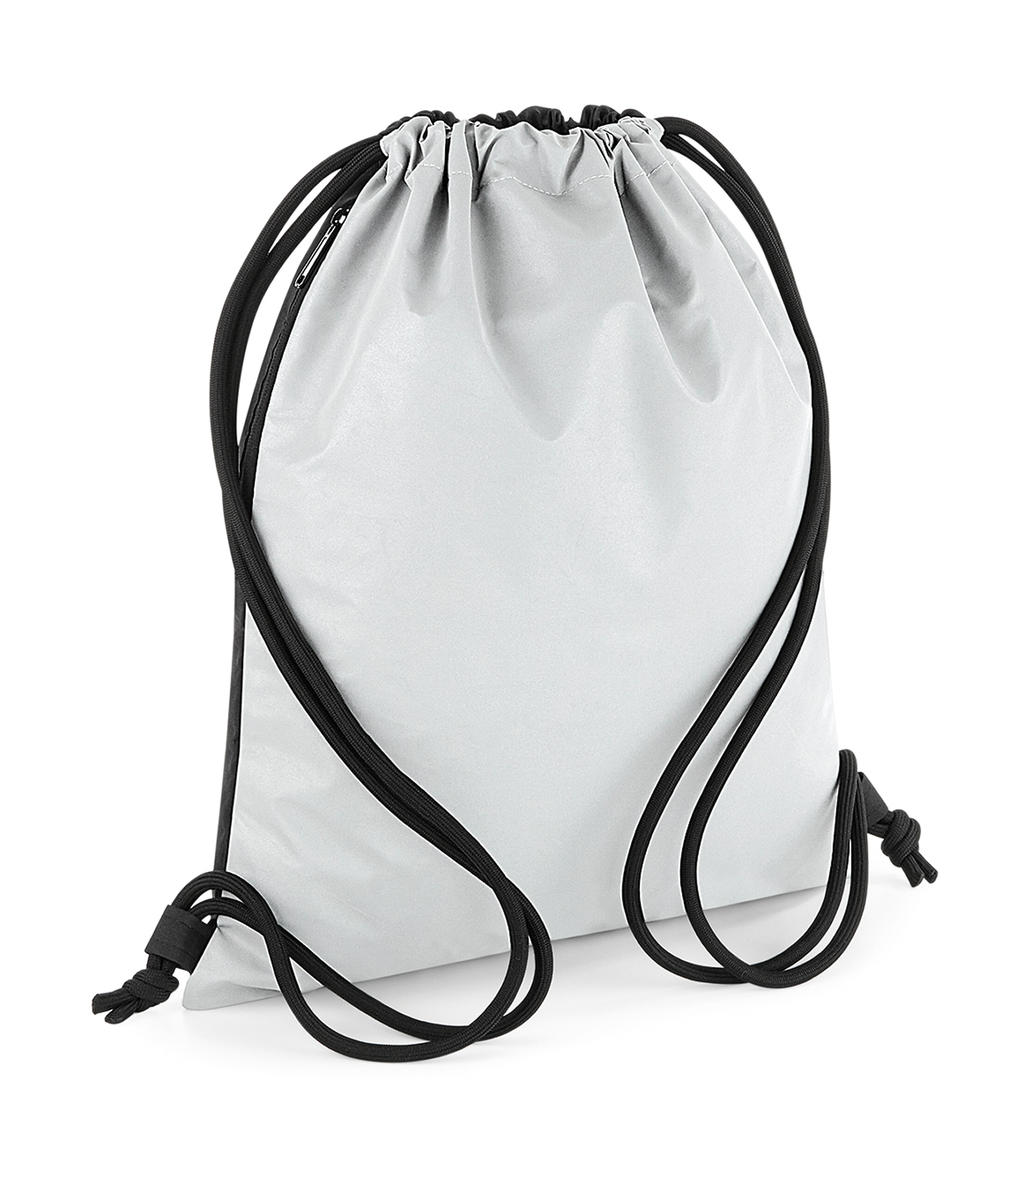  Reflective Gymsac in Farbe Silver Reflective